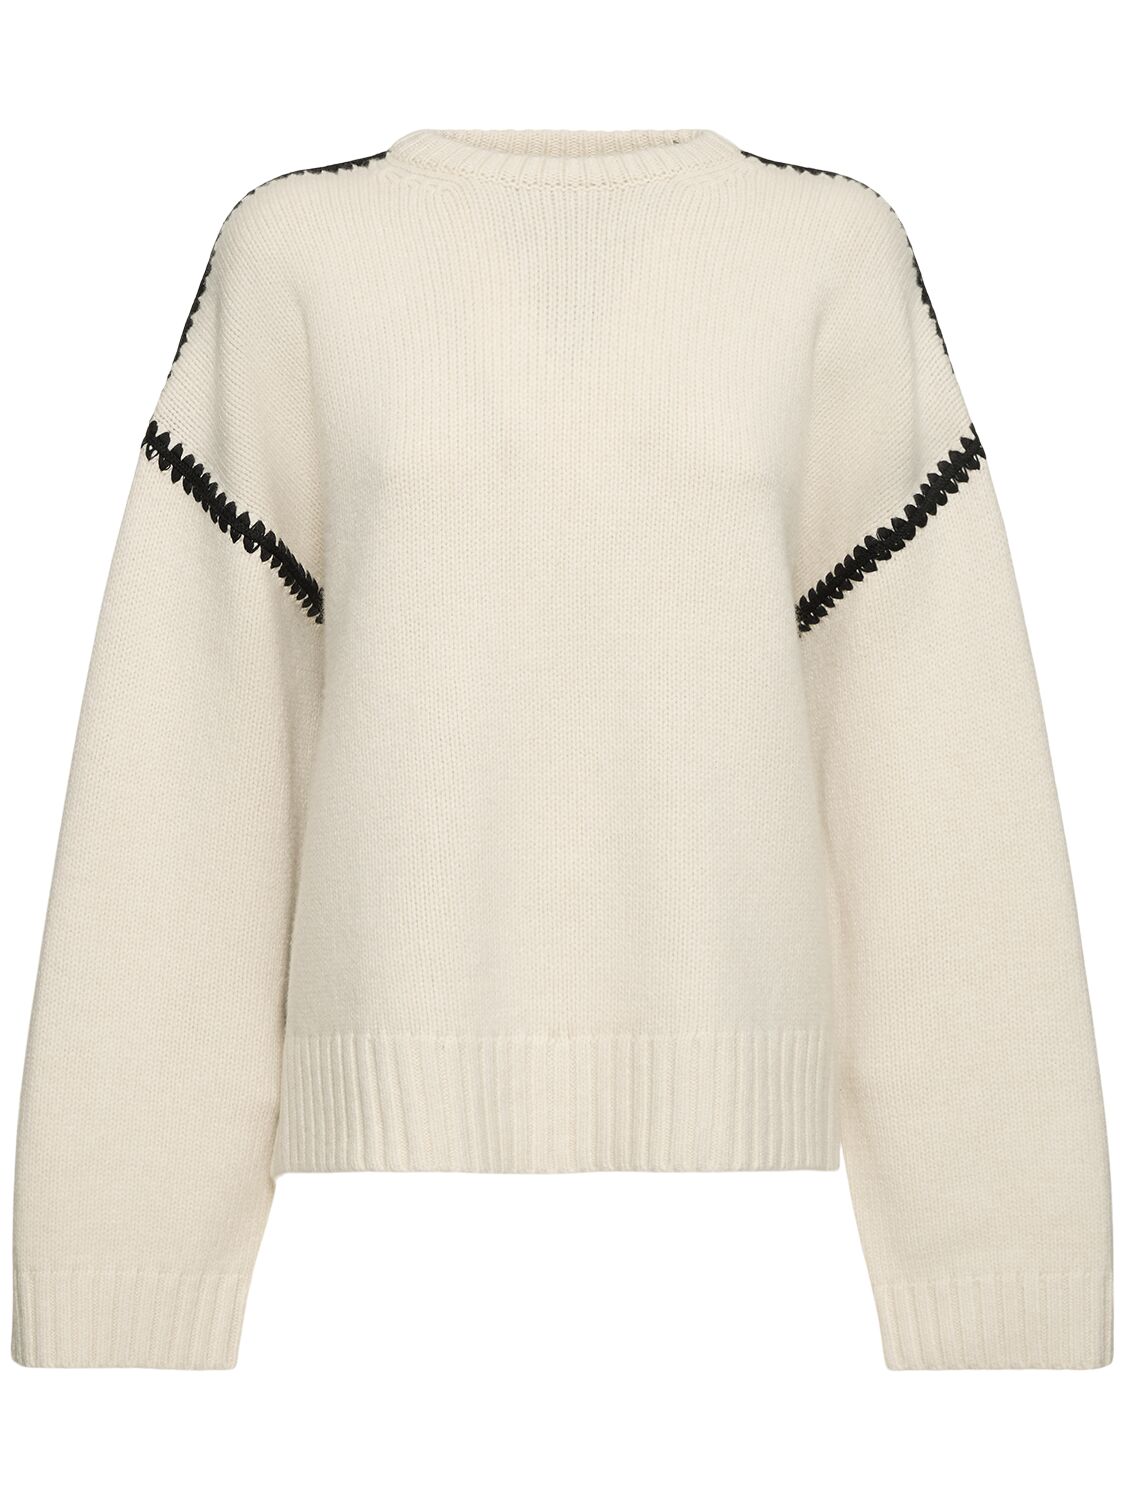 Embroidered Wool & Cashmere Sweater